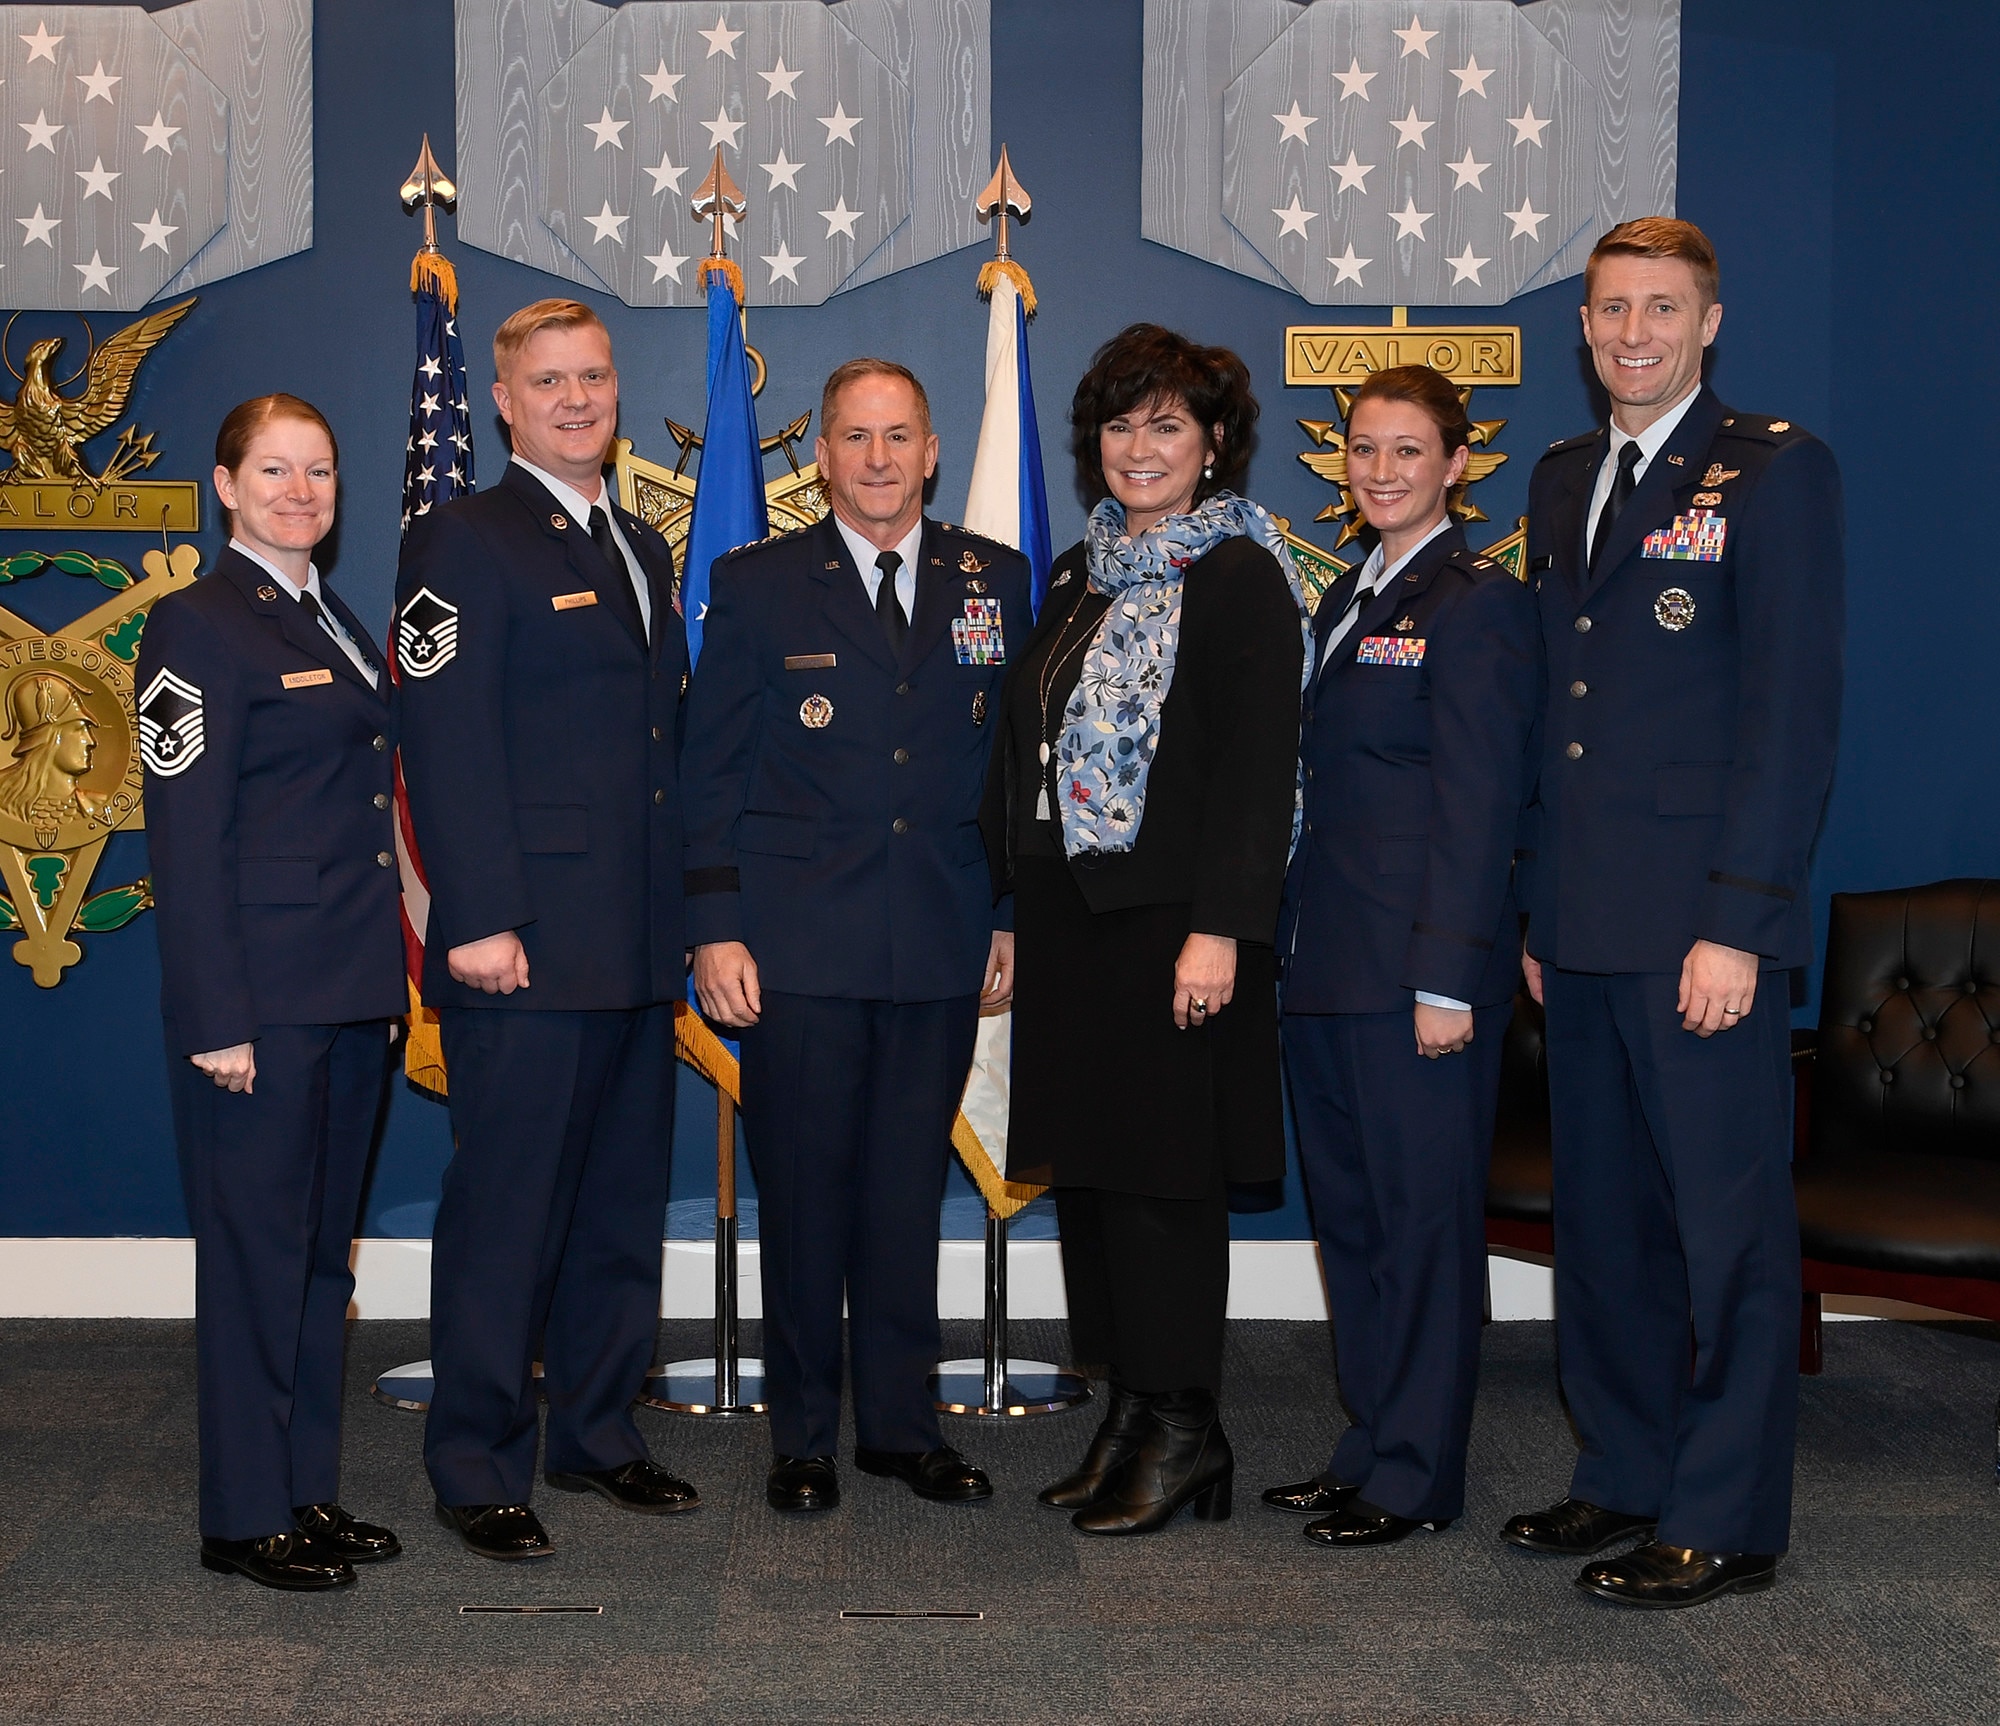 Senior Master Sgt. Alison Middleton, Master Sgt. Joshua Phillips, Capt. M. Helen Marino and Lt. Col. Mark Garlow, recipients of the 2017 Lance P. Sijan award, stand with Air Force Chief of Staff Gen. David L. Goldfein and Ms. Janine Sijan-Rozina at the Pentagon, in Arlington, Va., April 17, 2019. Sijan was the first Air Force Academy graduate to receive the Medal of Honor for his bravery and courage while evading capture and during his subsequent captivity as a prisoner of war after being shot down over Vietnam on Nov. 9, 1967. (U.S. Air Force photo by Andy Morataya)